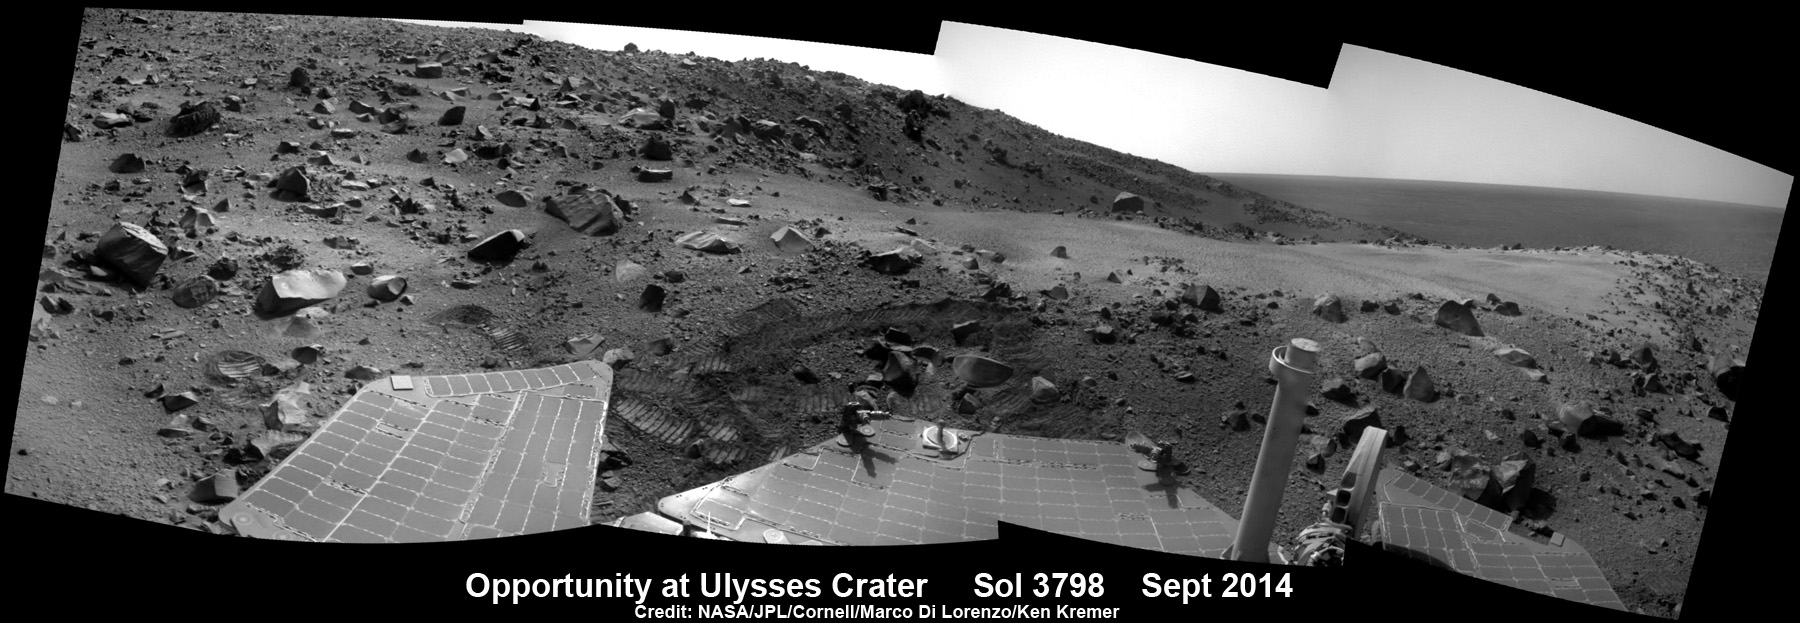 NASA’s Opportunity Mars rover moves closer to Ulysses crater for up close examination of the interior and surrounding ejecta rocks from her current location after ascending the slopes of the Endeavour crater rim segment.  This navcam camera photo mosaic was assembled from images taken on Sol 3798, Sept. 30, 2014.  Credit: NASA/JPL/Cornell/Marco Di Lorenzo/Ken Kremer - kenkremer.com